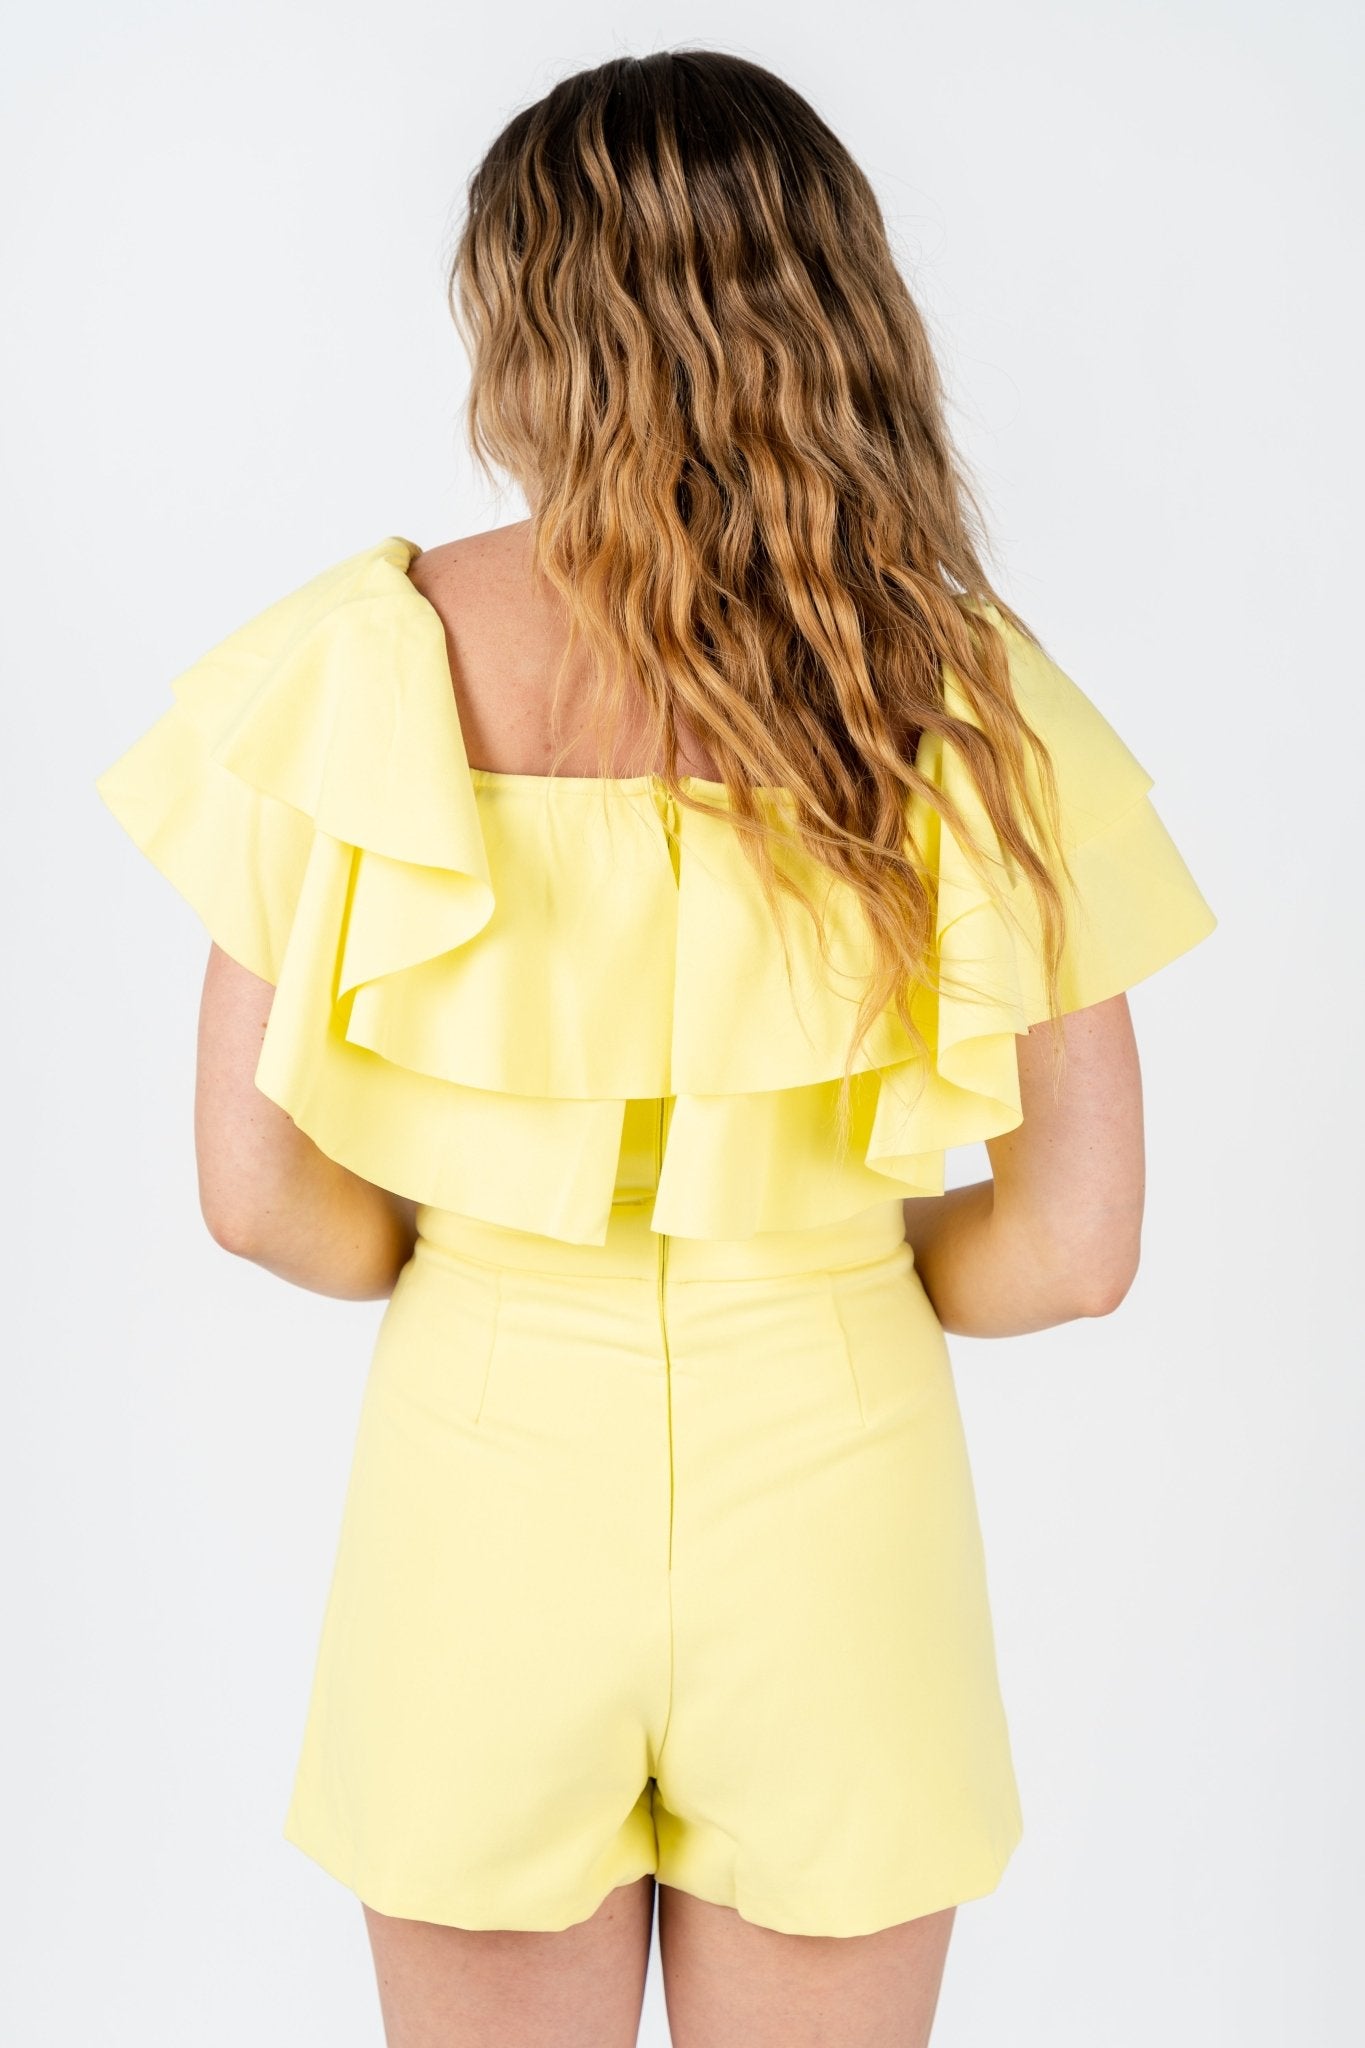 Layer ruffle romper lemon - Adorable Romper - Stylish Vacation T-Shirts at Lush Fashion Lounge Boutique in Oklahoma City